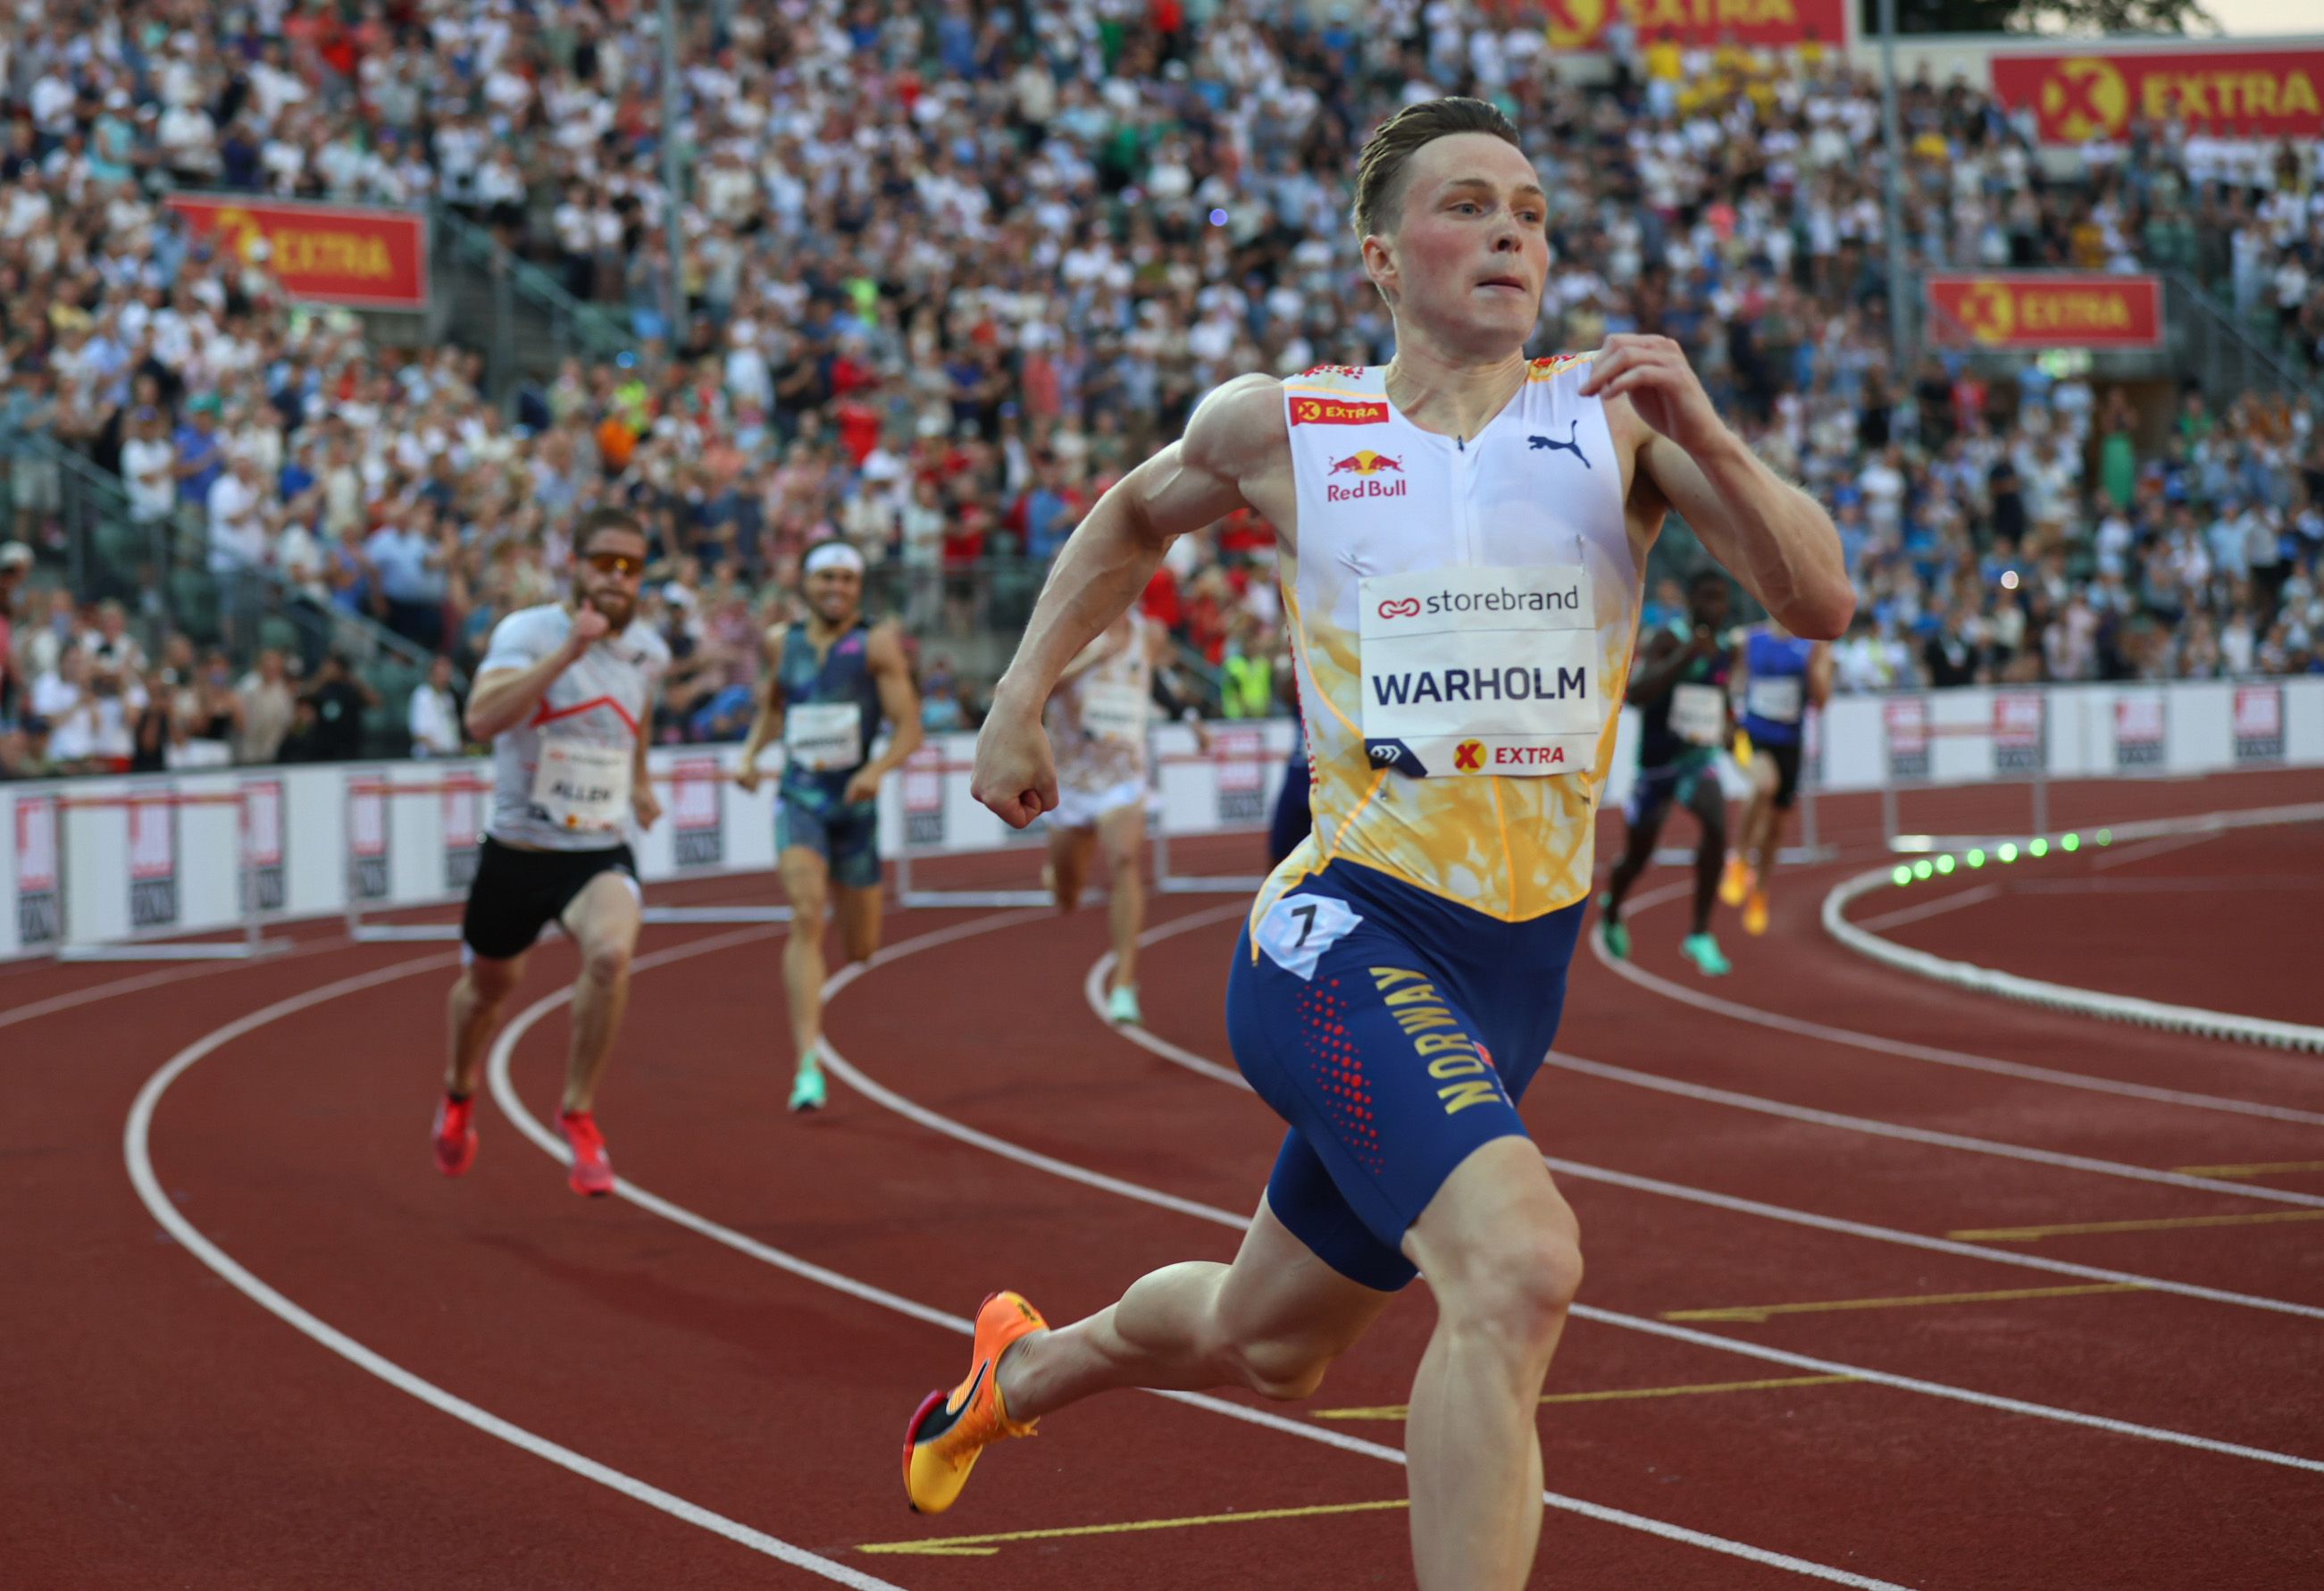 Karsten Warholm on his way to a Diamond League record in the 400m hurdles in Oslo